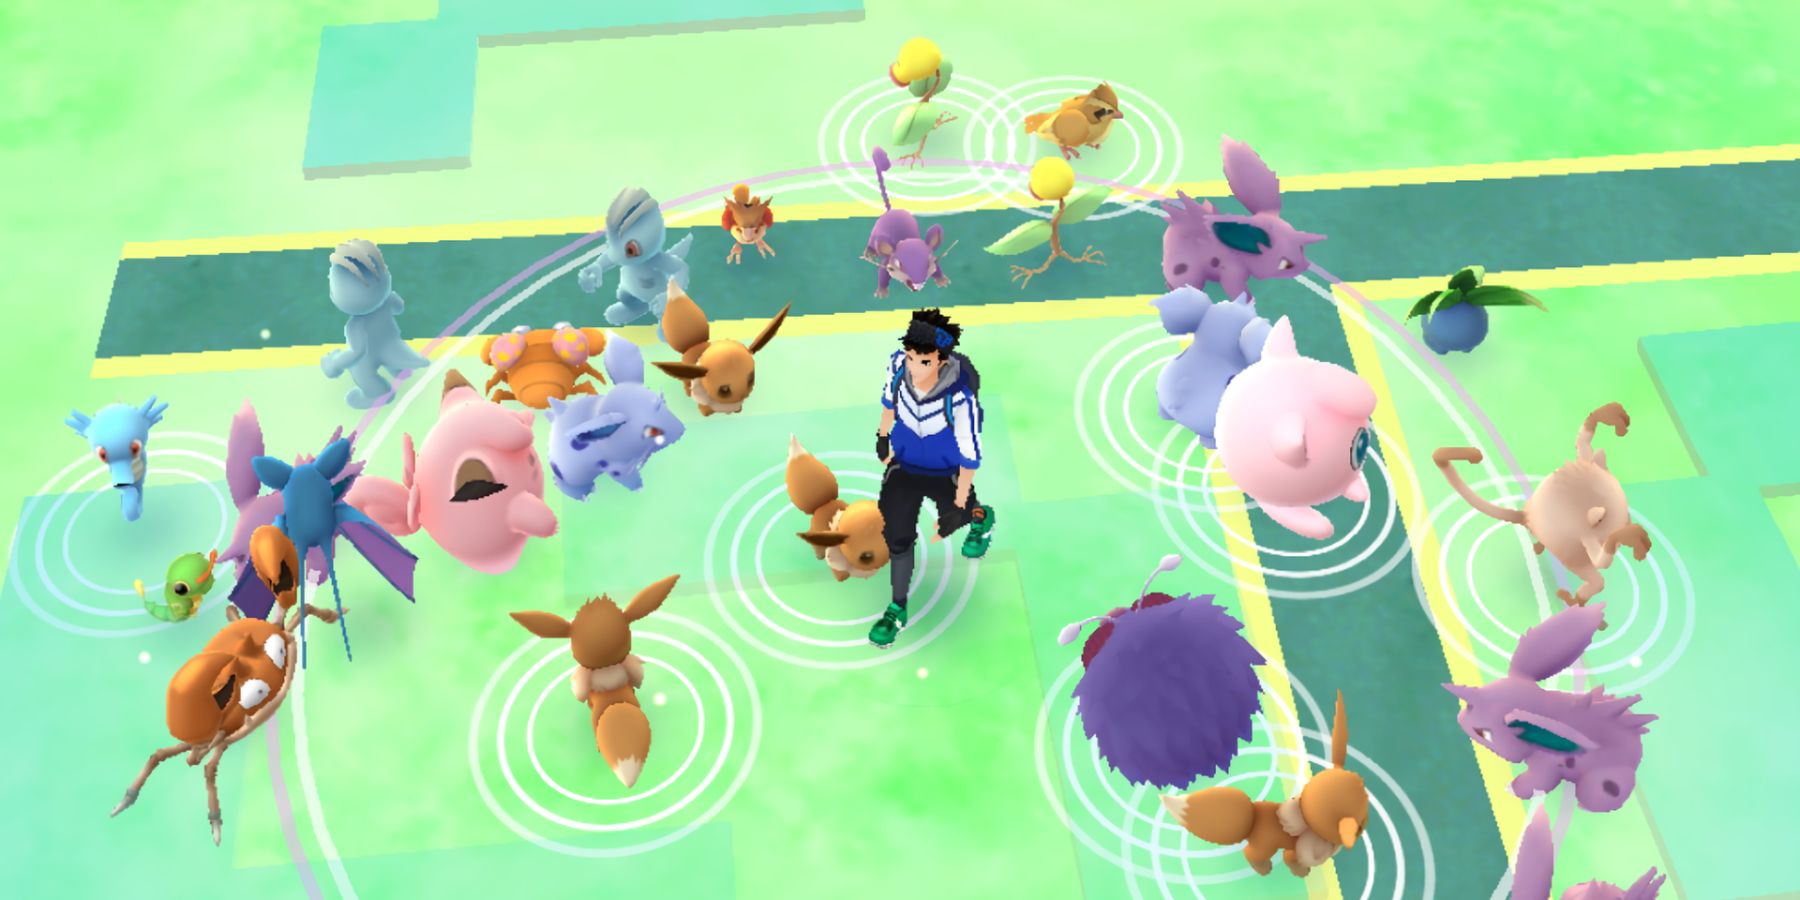 A screenshot from Pokemon GO showing a player character surrounded by several wild Pokemon.